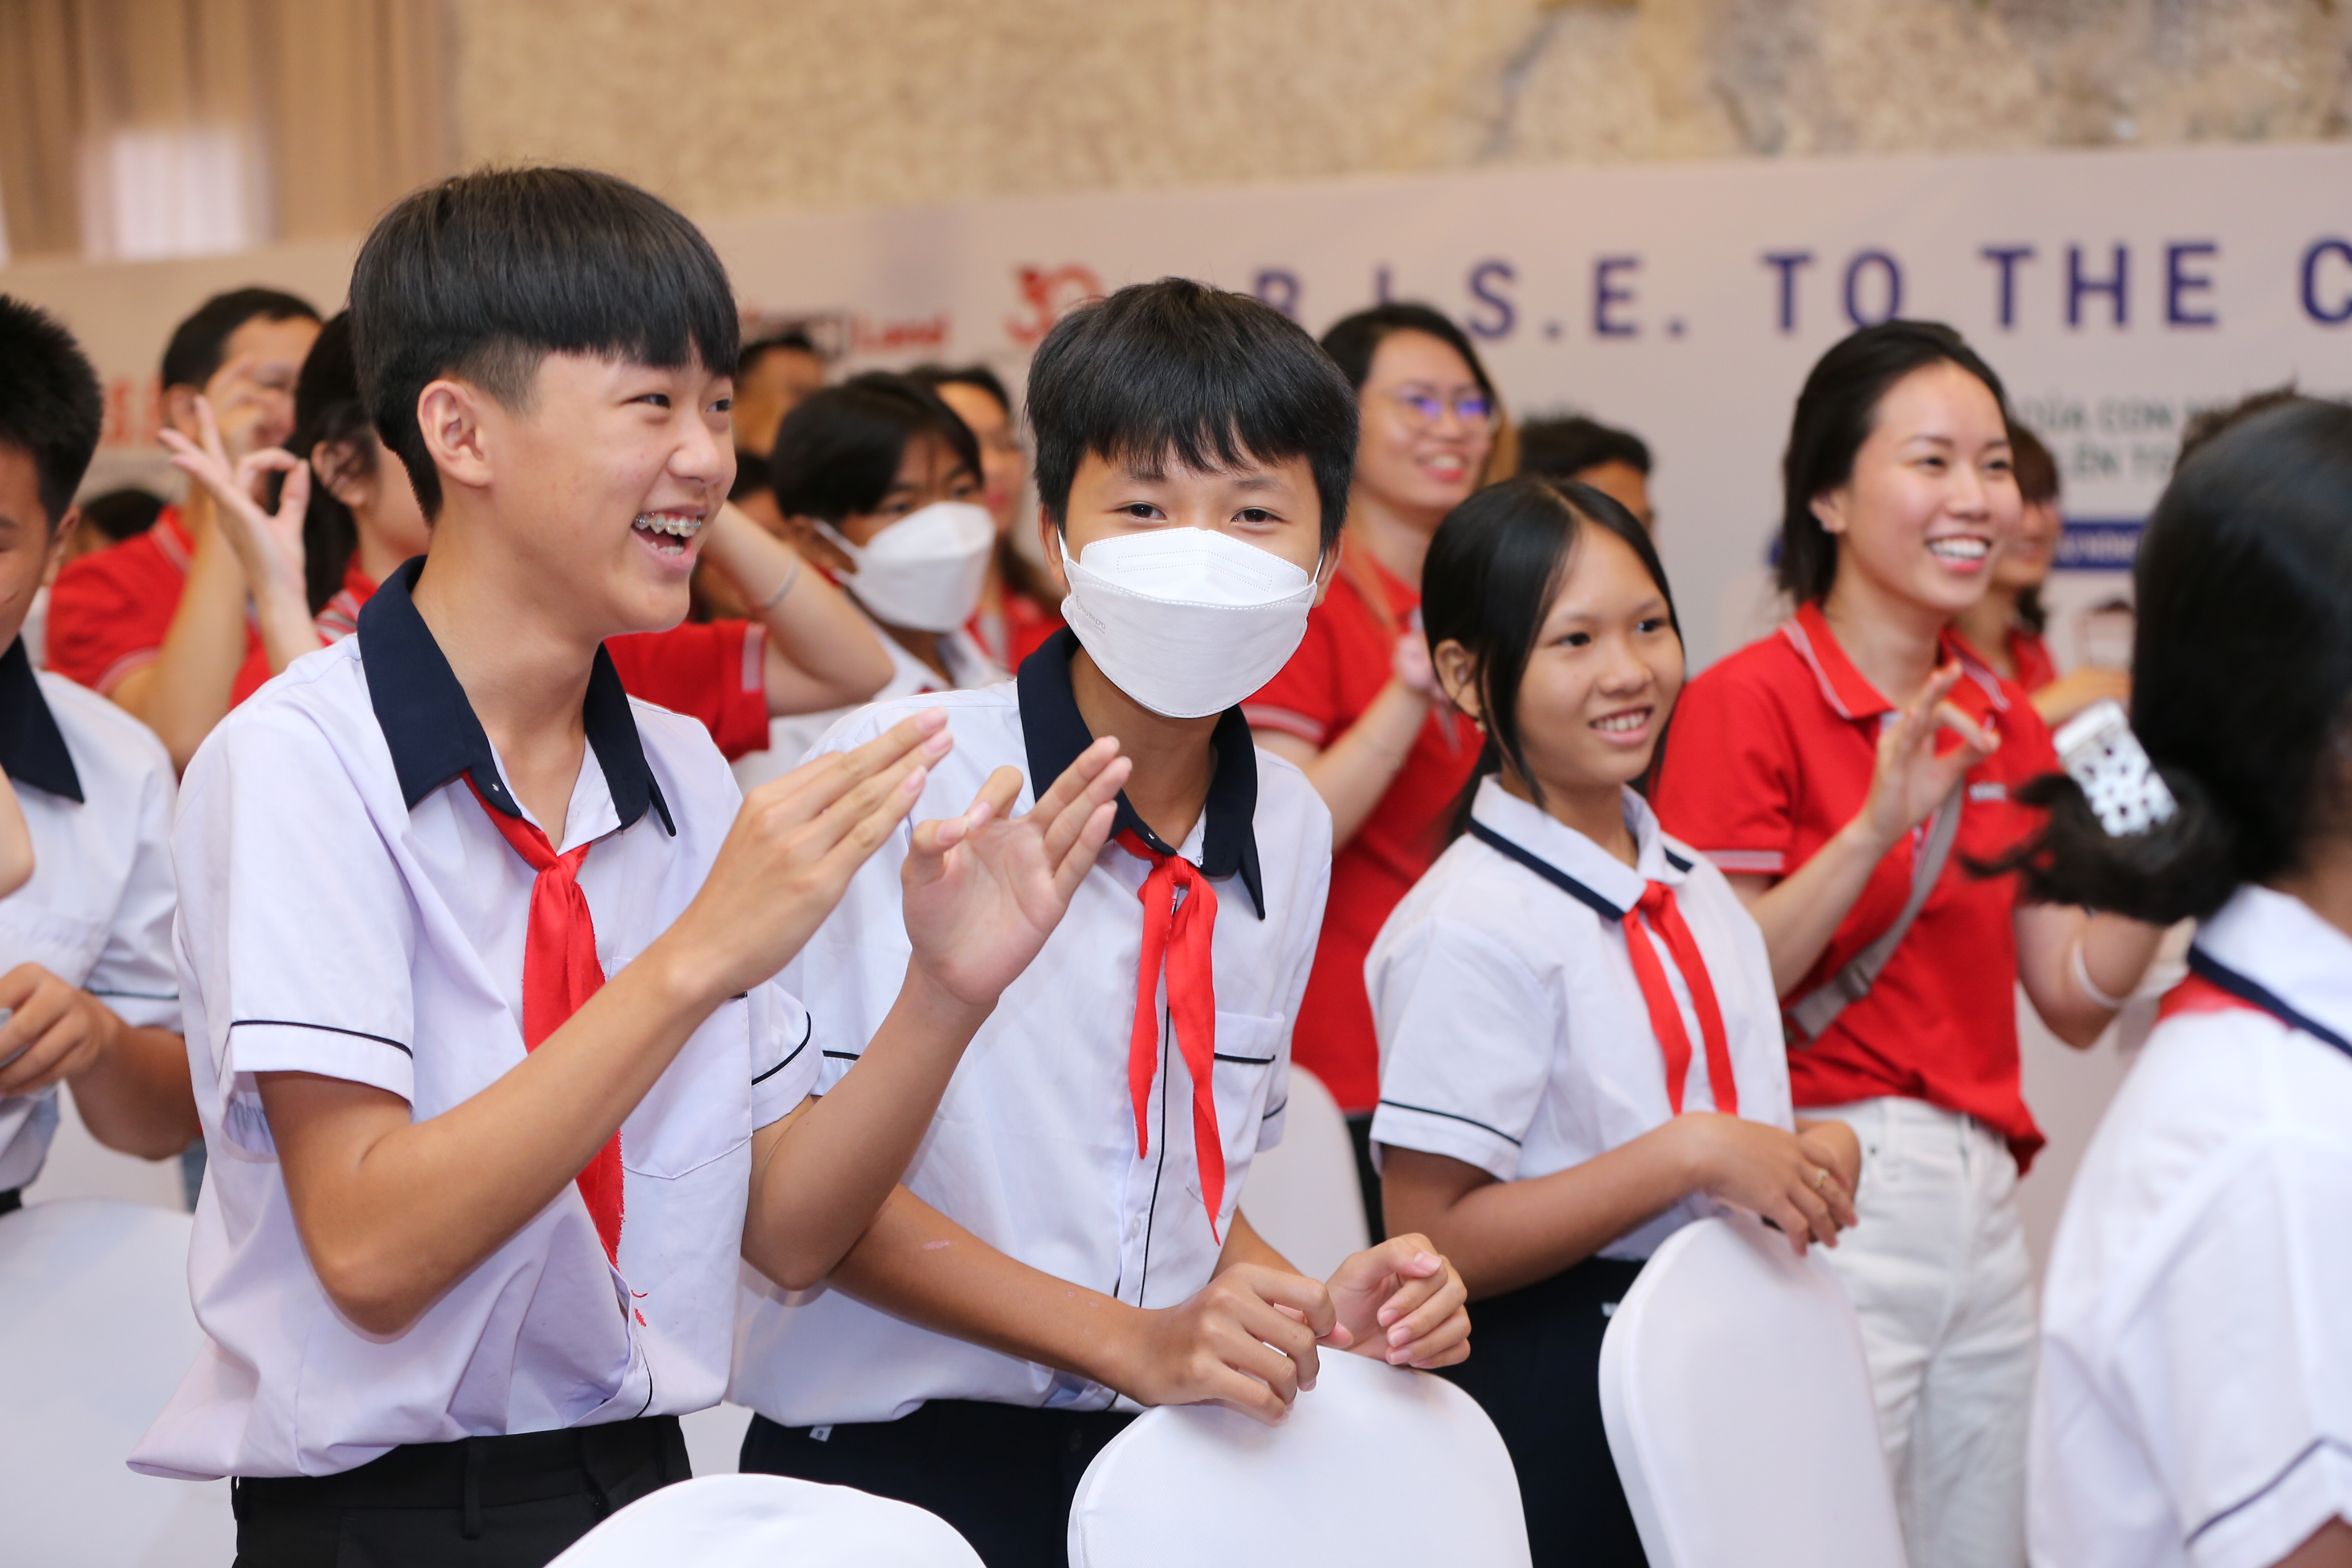 Students of Ganh Dau Primary and Secondary School at the event.